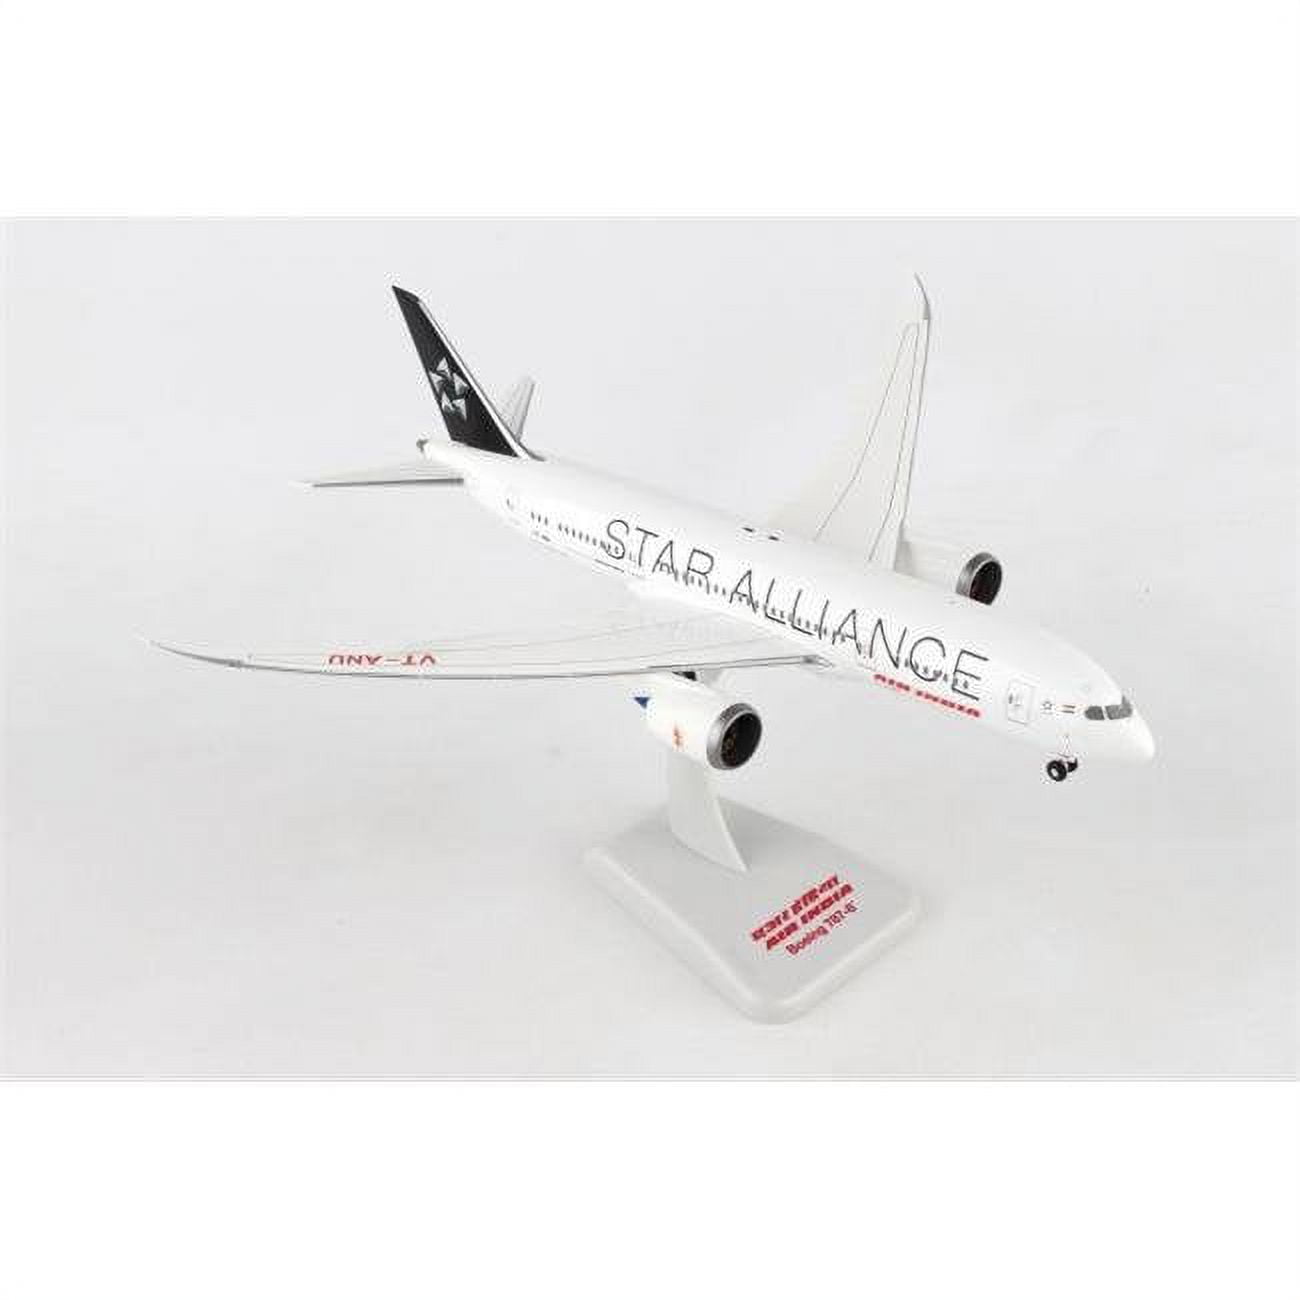 Hogan Wings Hg10284g Air India 787-8 1-200 With Gear No Stand Star Alliance Airplane Model